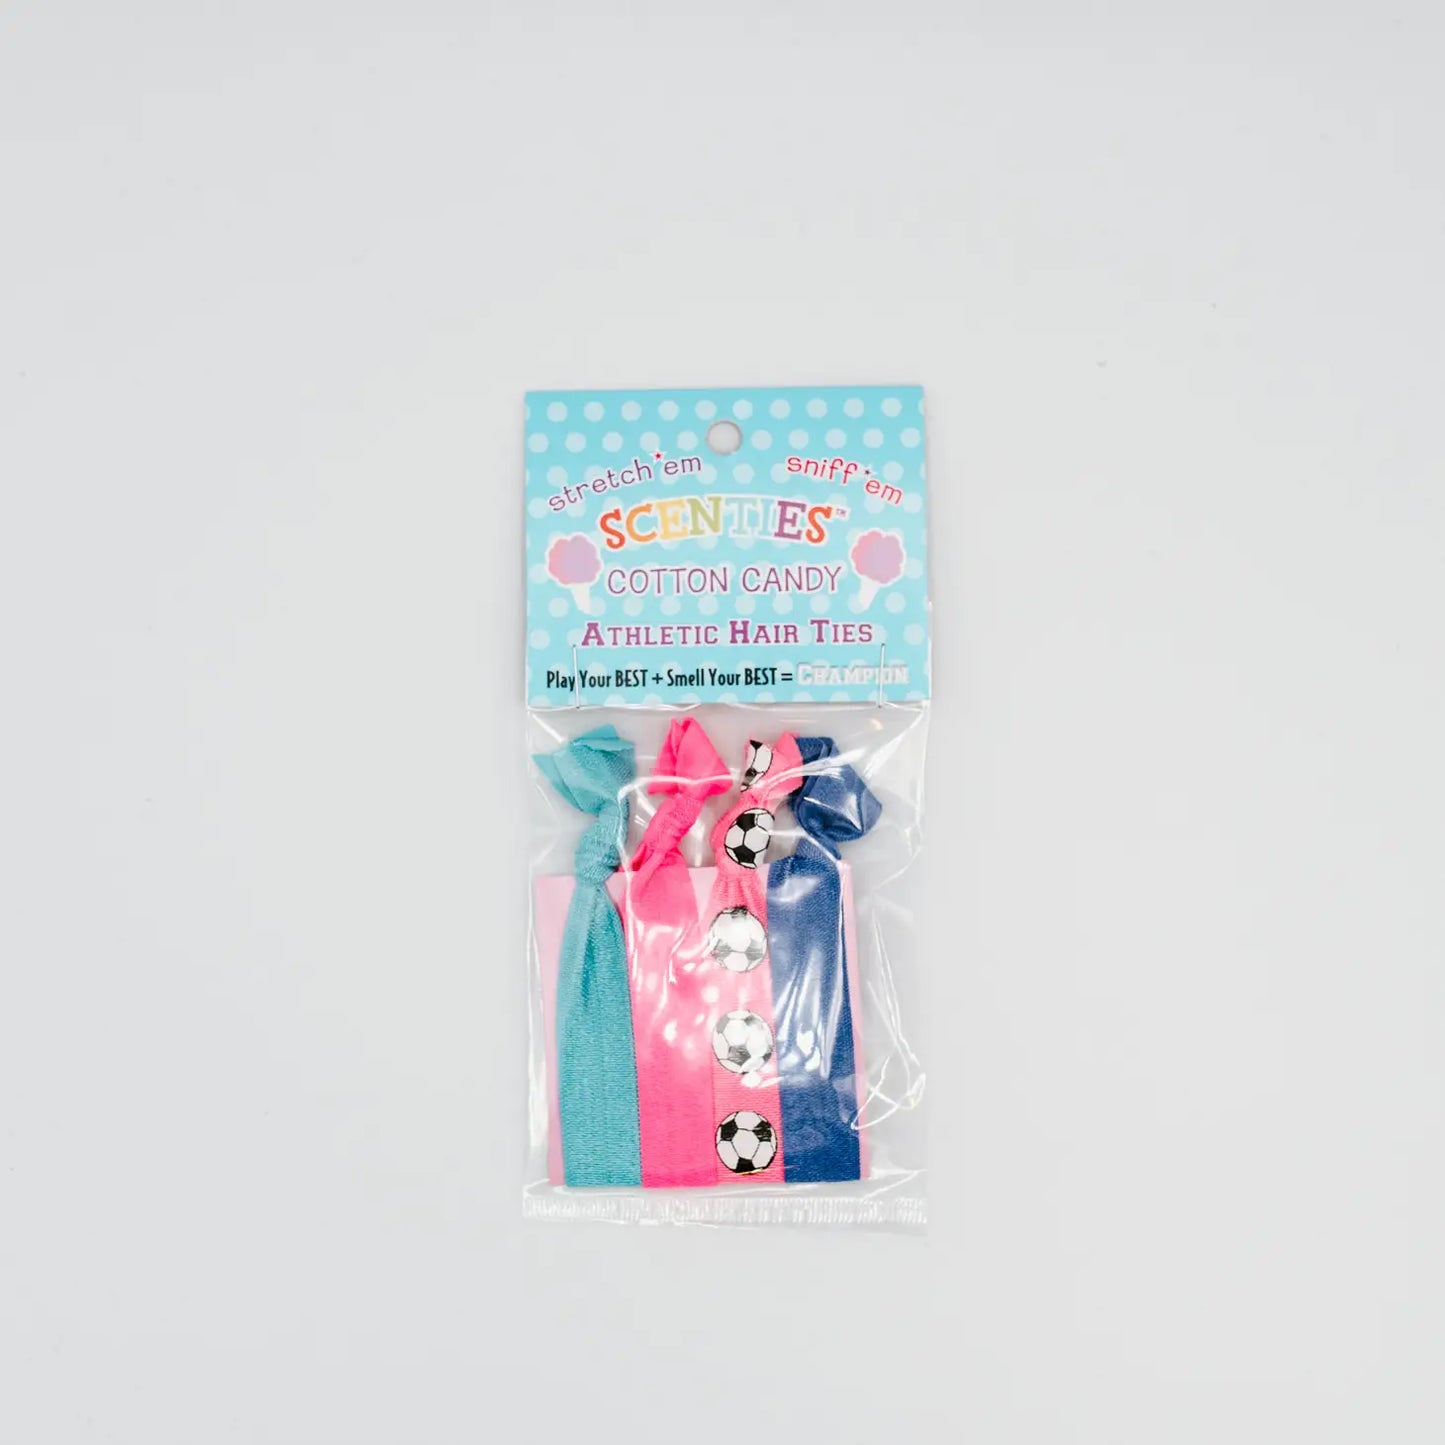 Soccer Athletic Hair Ties Cotton Candy Scented